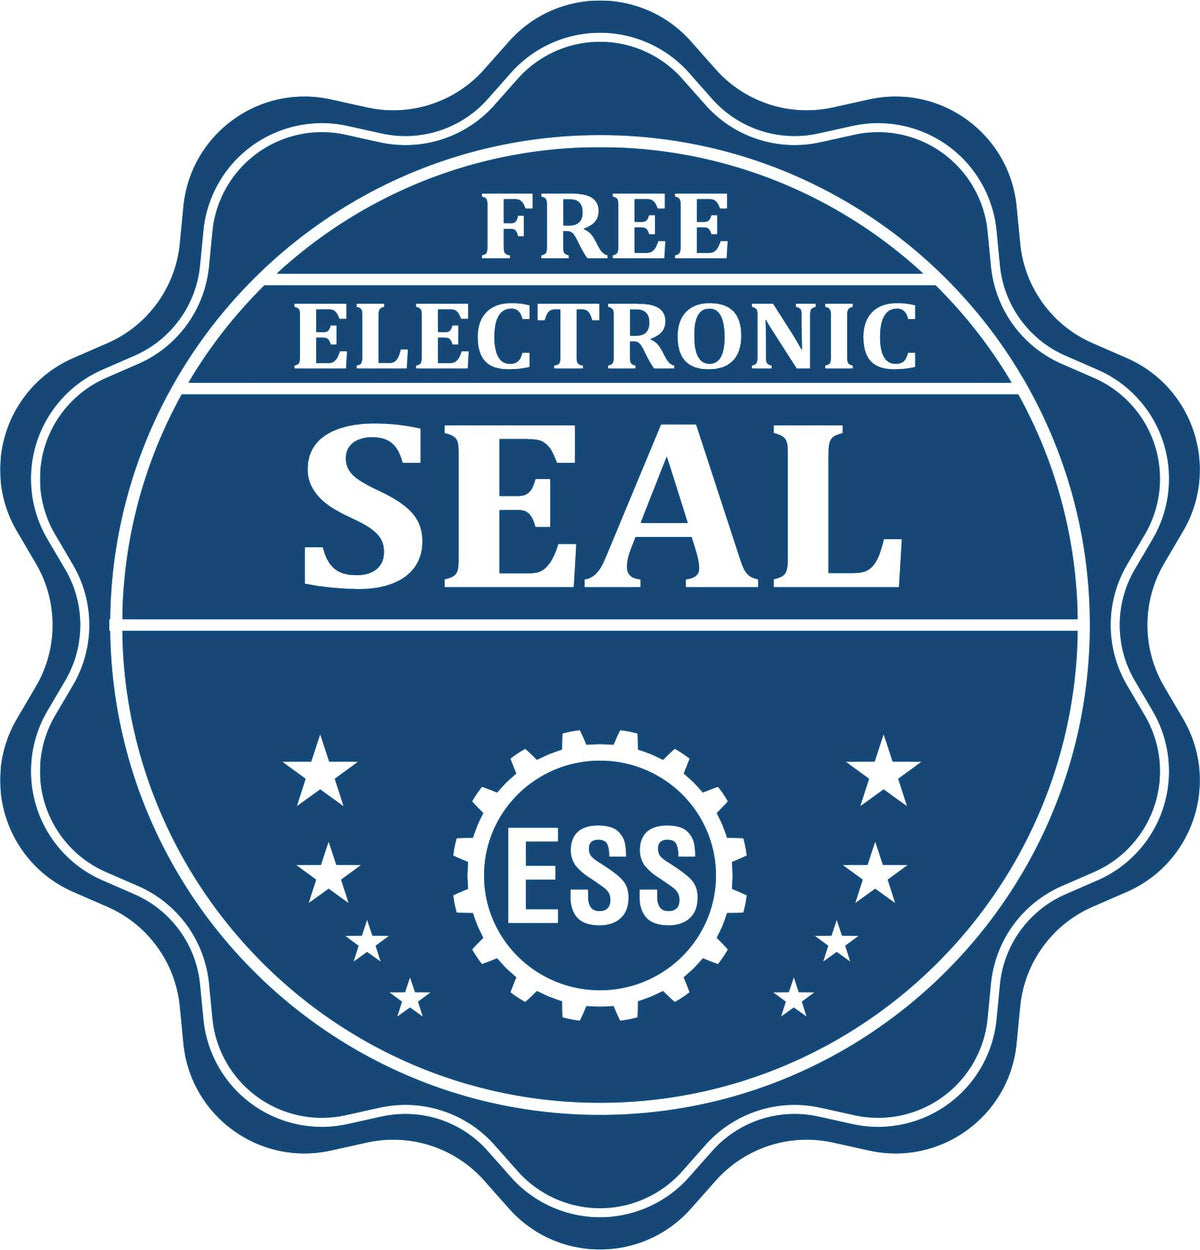 A badge showing a free electronic seal for the Slim Pre-Inked Massachusetts Land Surveyor Seal Stamp with stars and the ESS gear on the emblem.